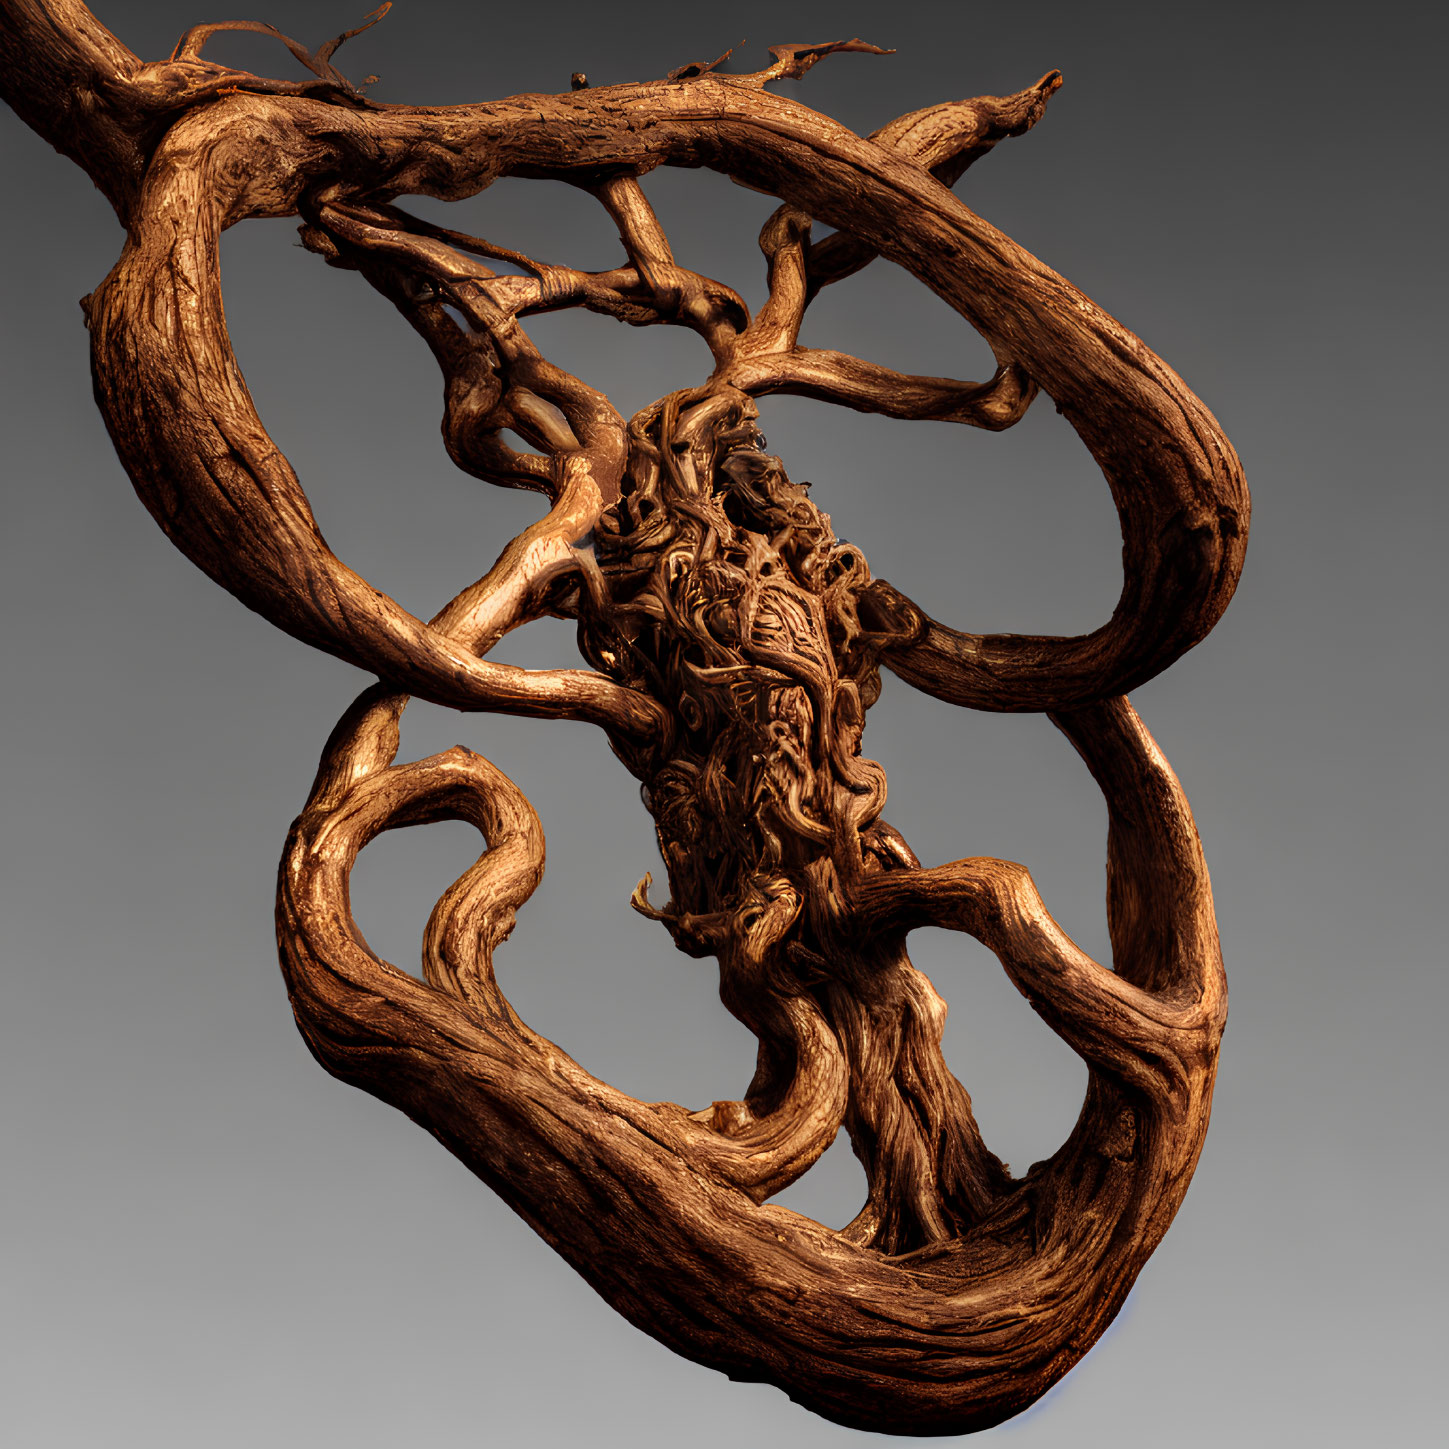 Detailed wooden sculpture of twisted tree on grey background